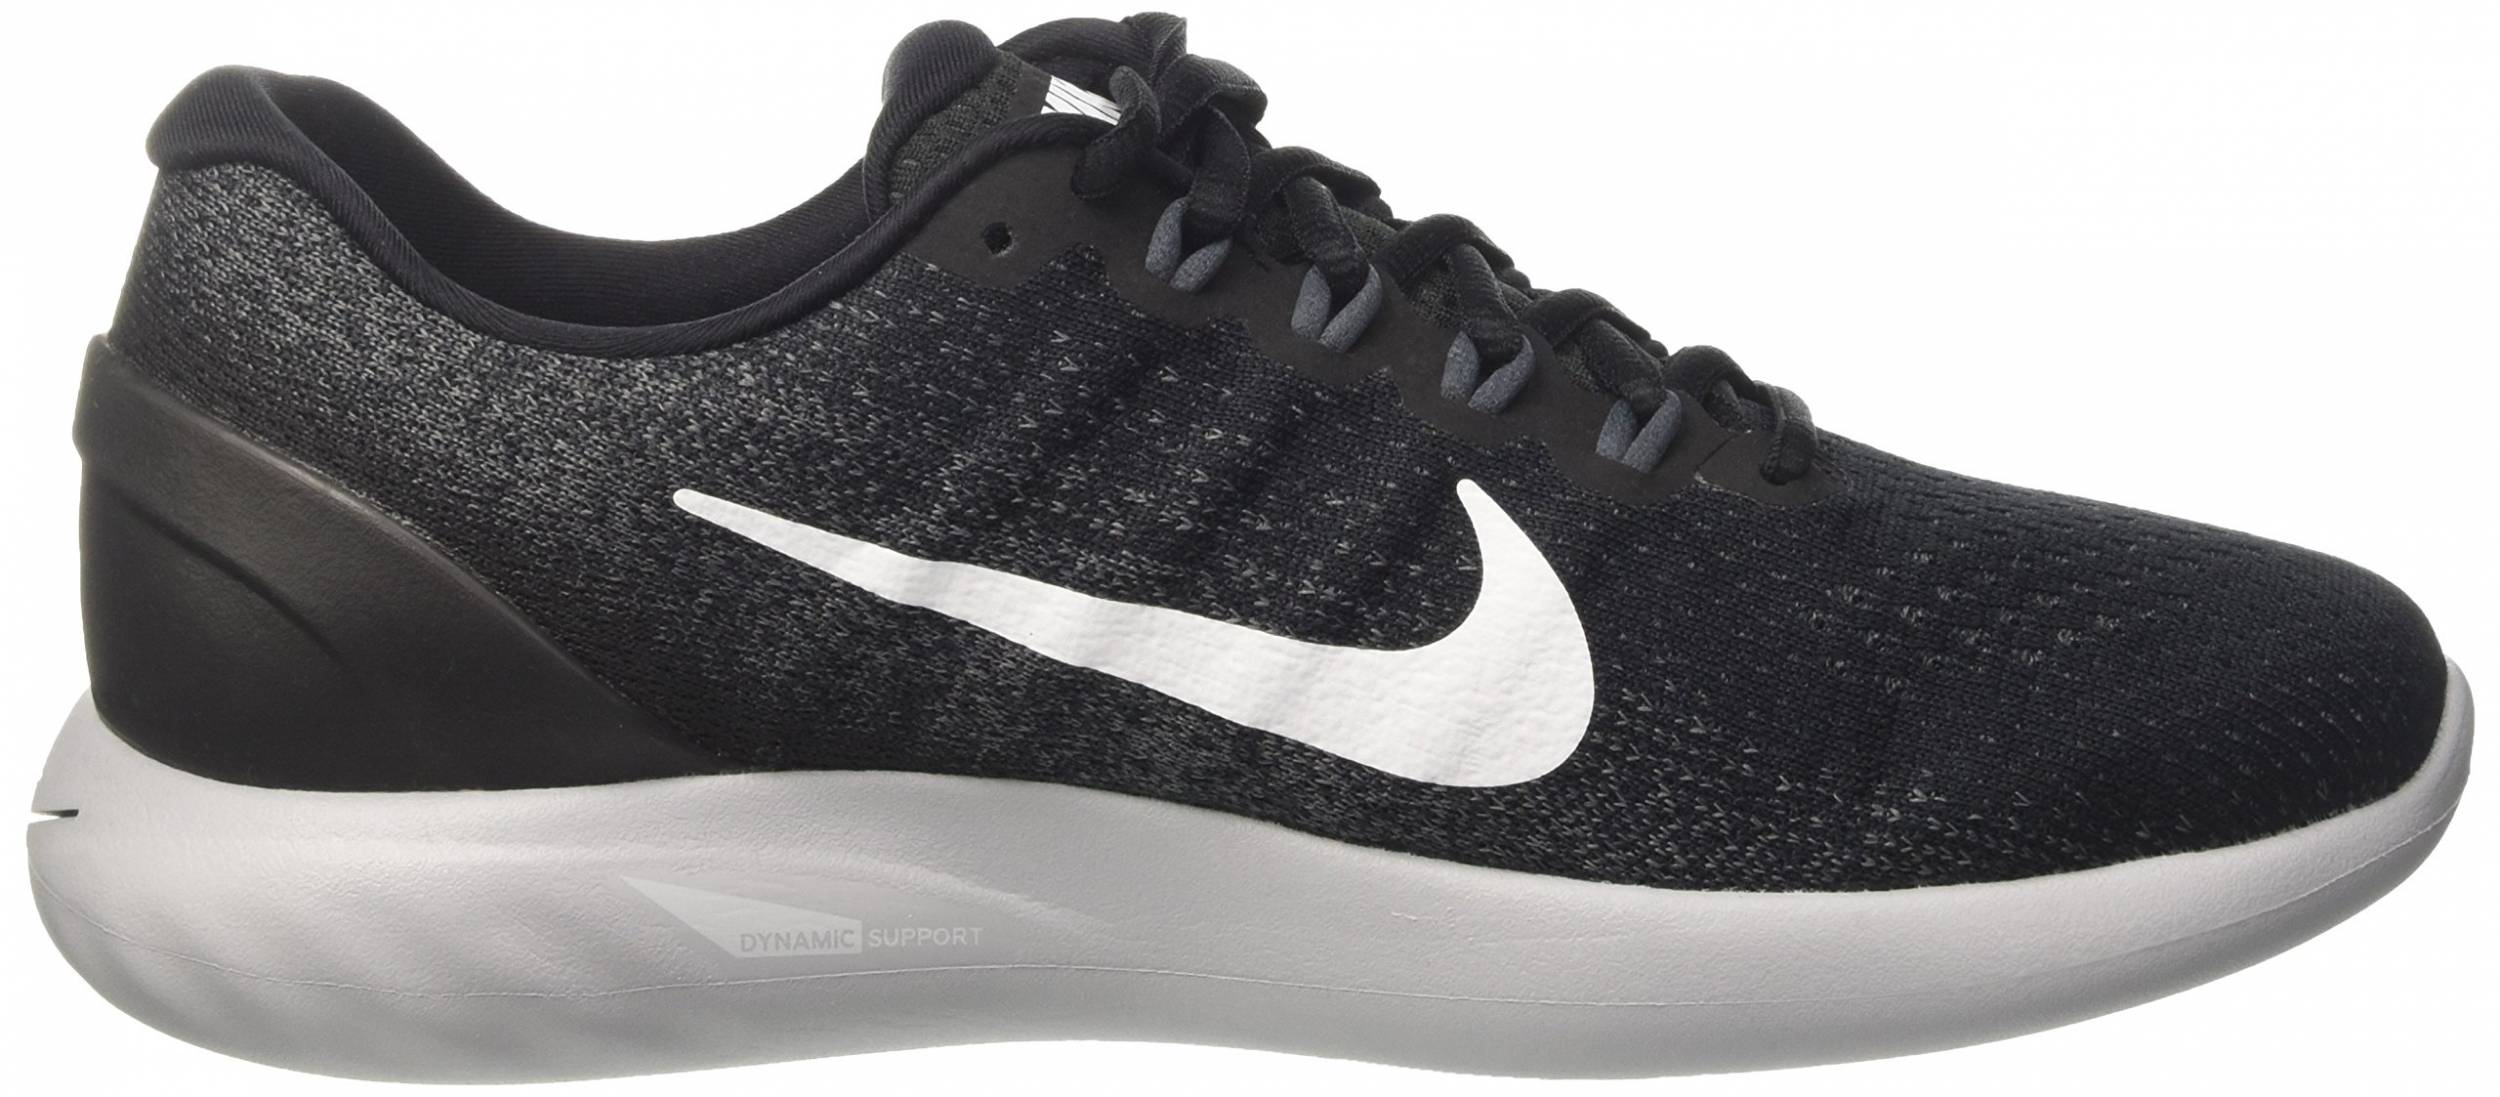 Only £102 + Review of Nike LunarGlide 9 